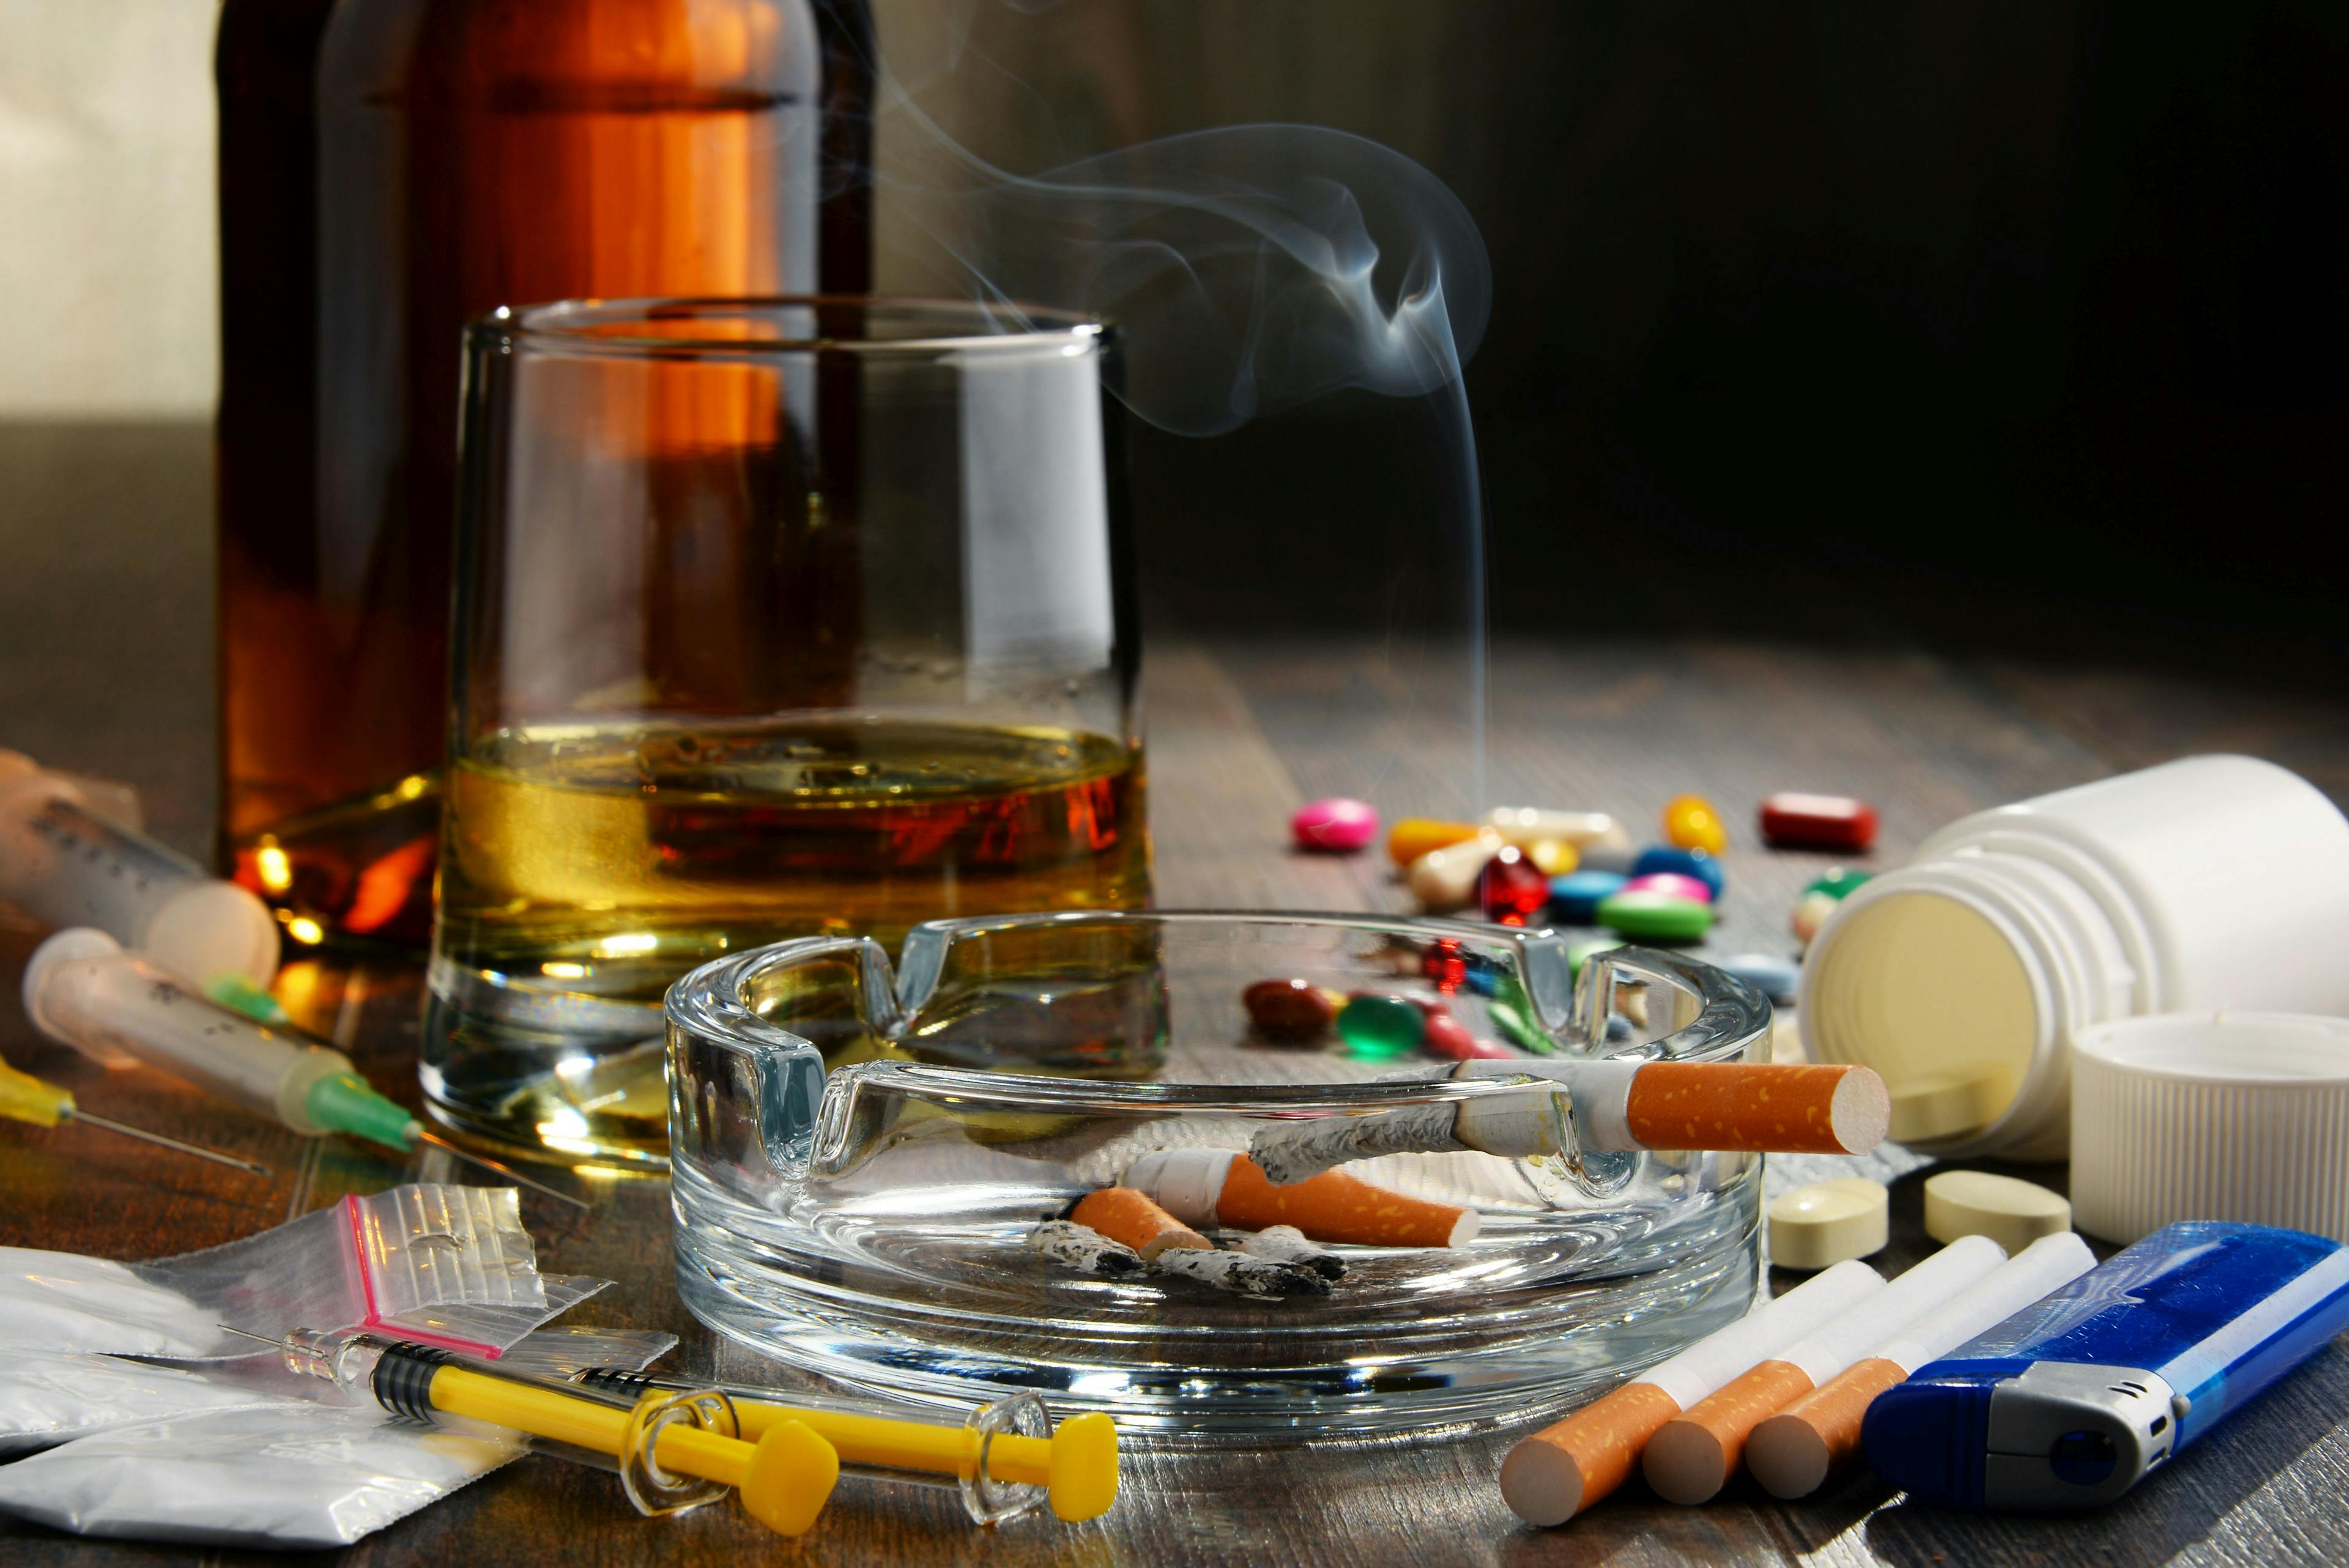 Understanding the intersection between substance misuse and acquired brain injury can assist clinicians in accurately diagnosing and treating these cooccurring conditions.